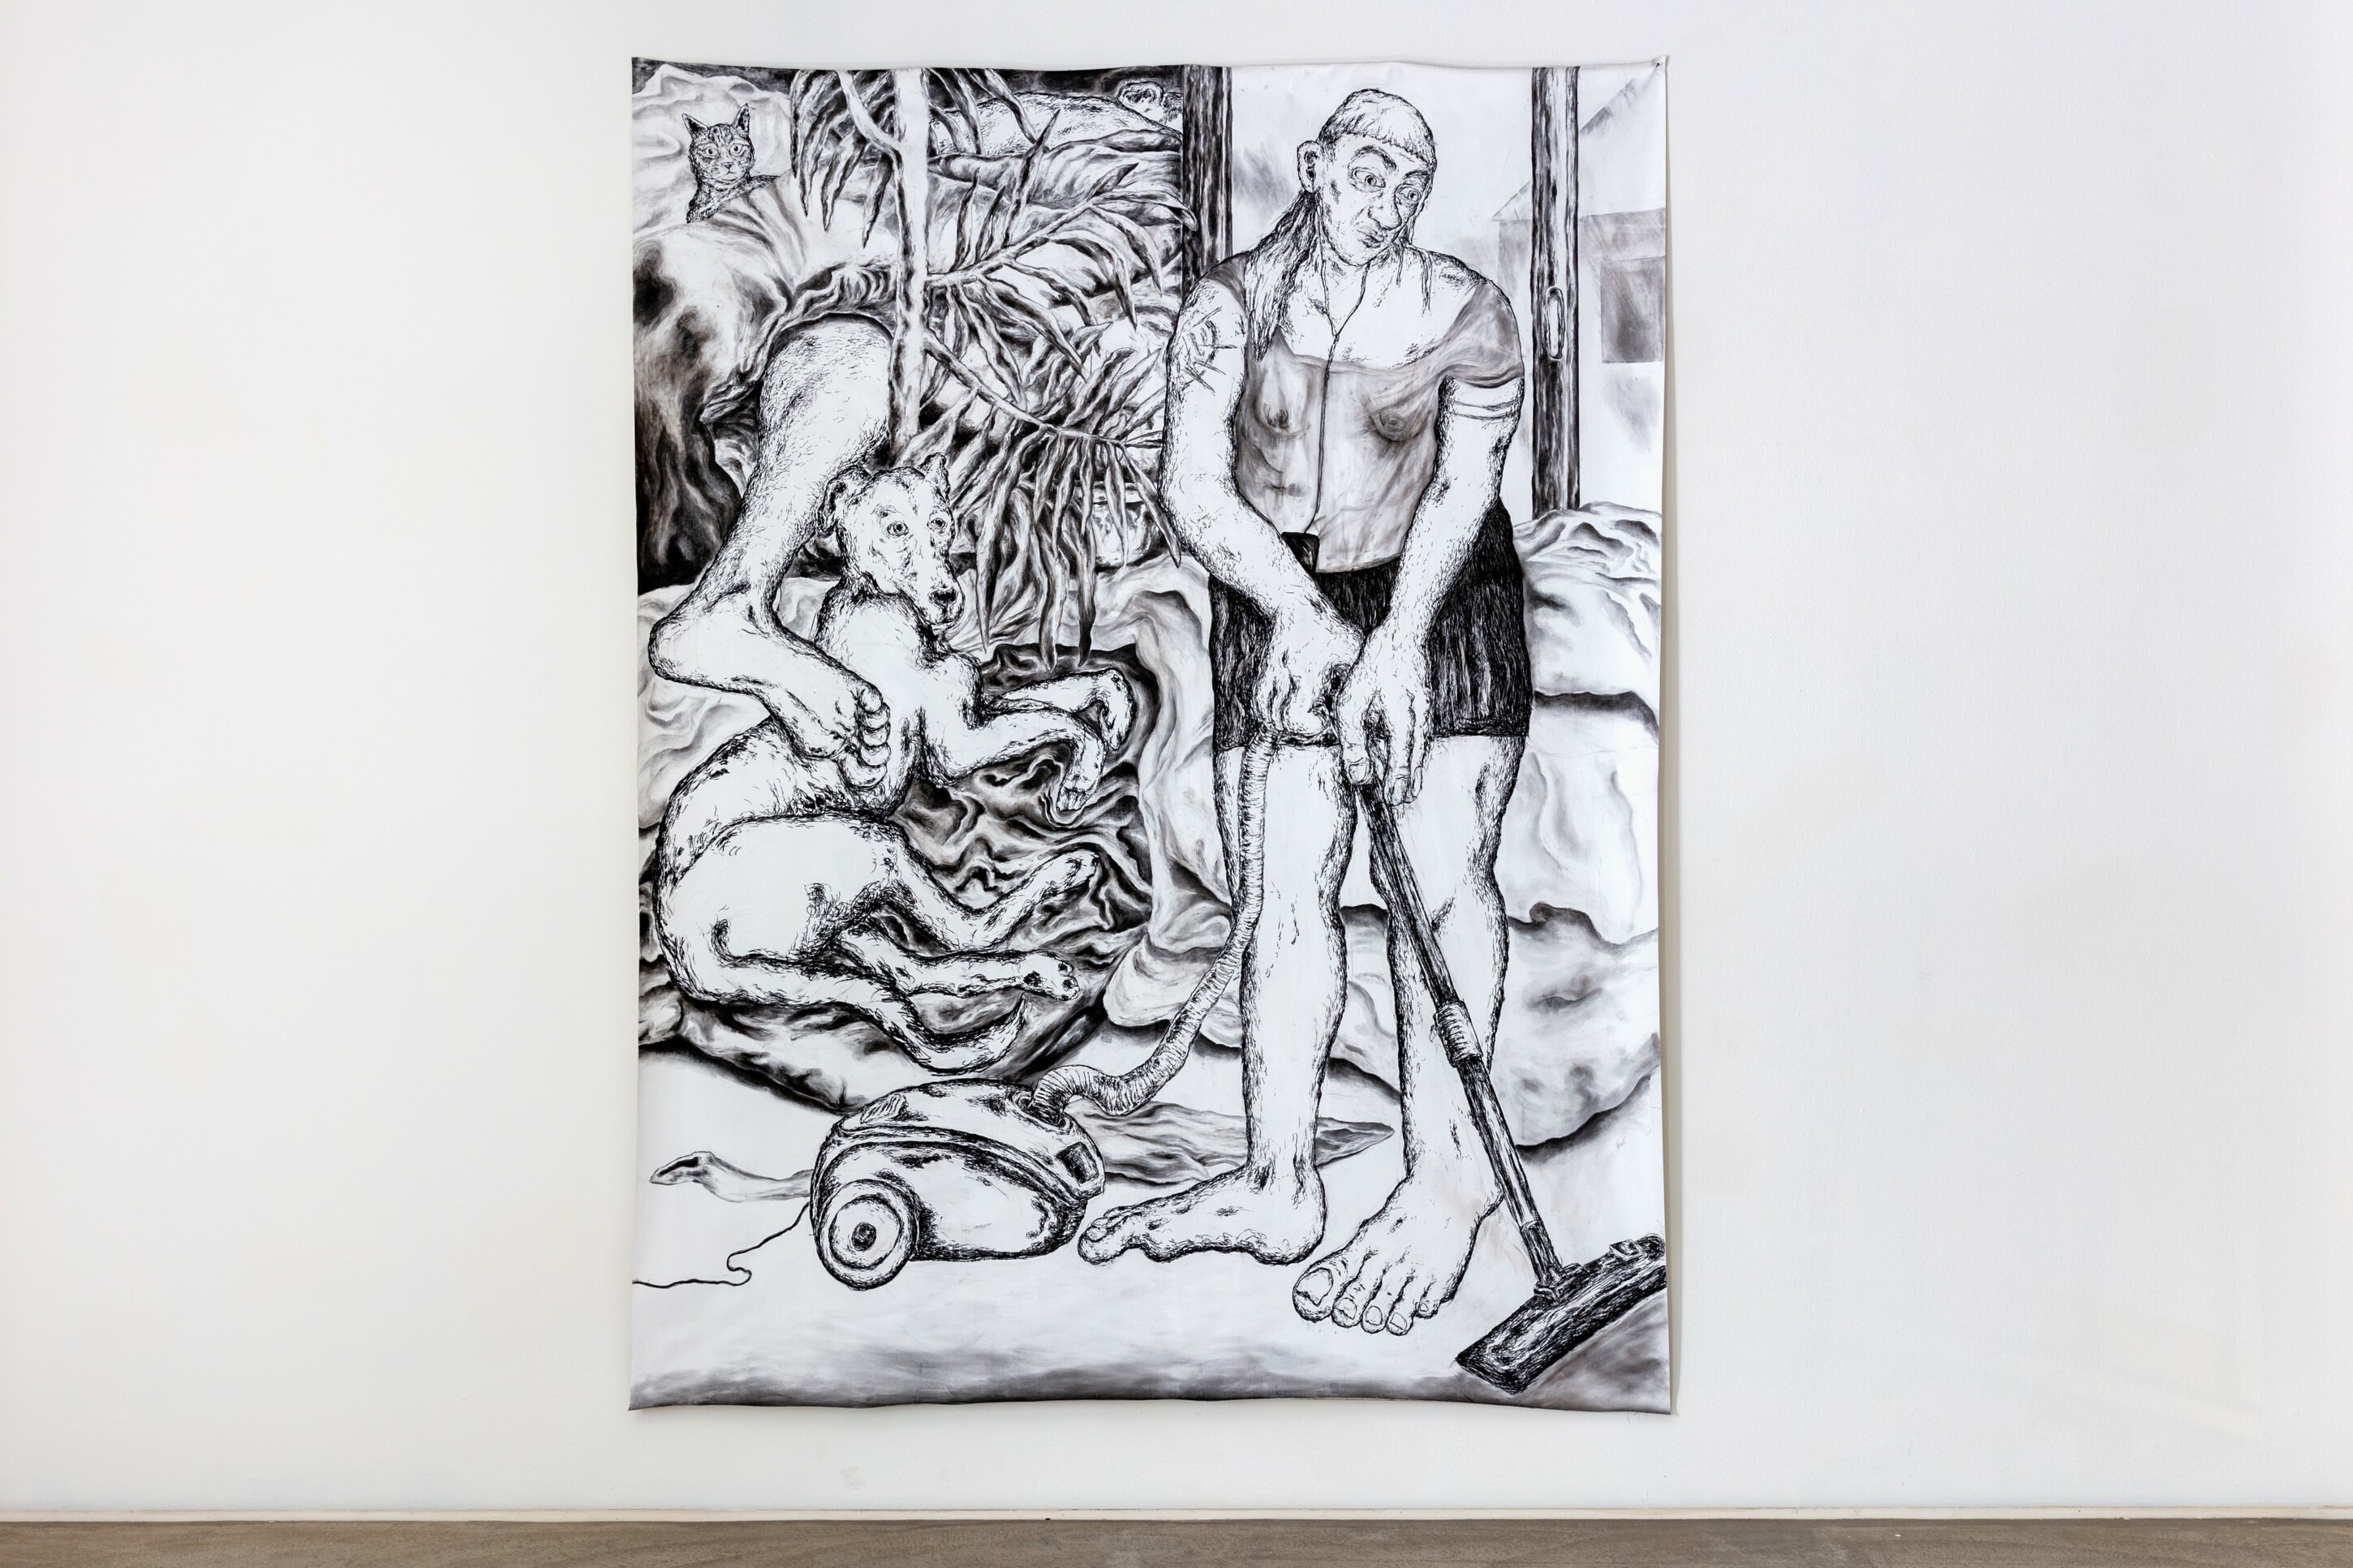 “What a Mess”, 2022, charcoal on paper, 210 × 164 cm, Exhibition view, Kunstraum Riehen, Basel